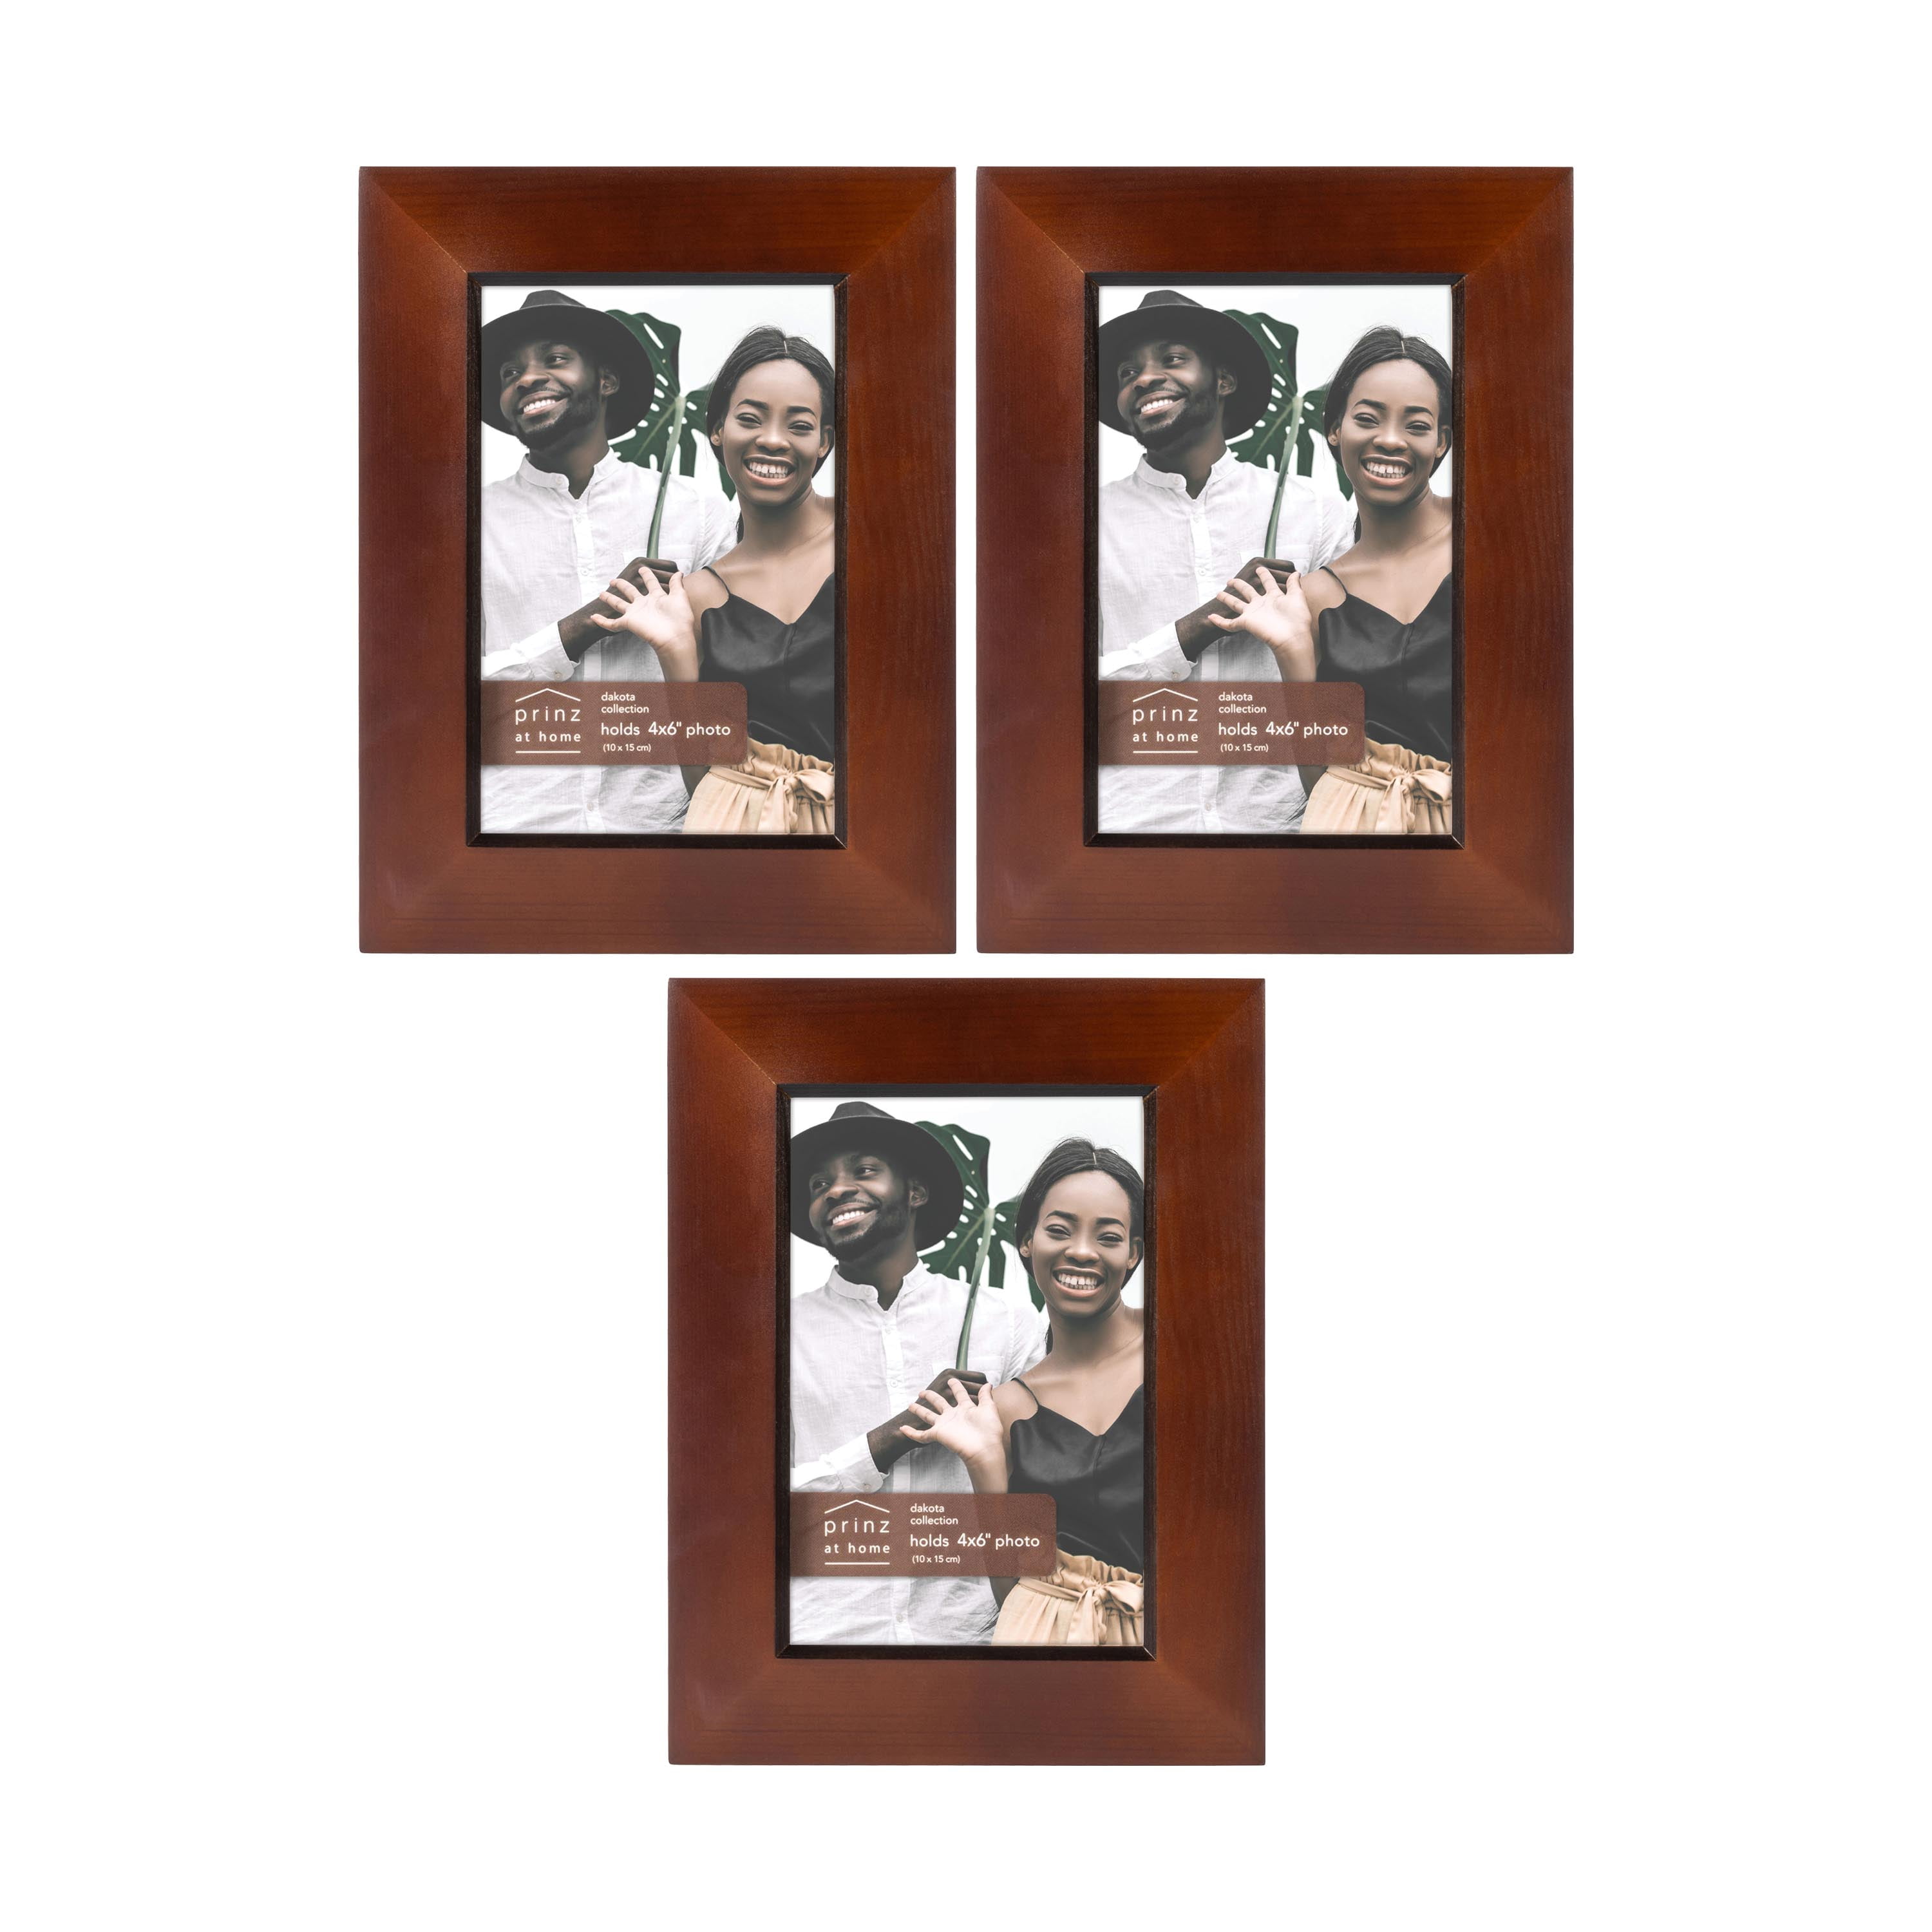 GALLERY SOLUTIONS 14x18 Mahogany Wall Frame with White & Lavender Mat For 11x14 Image 